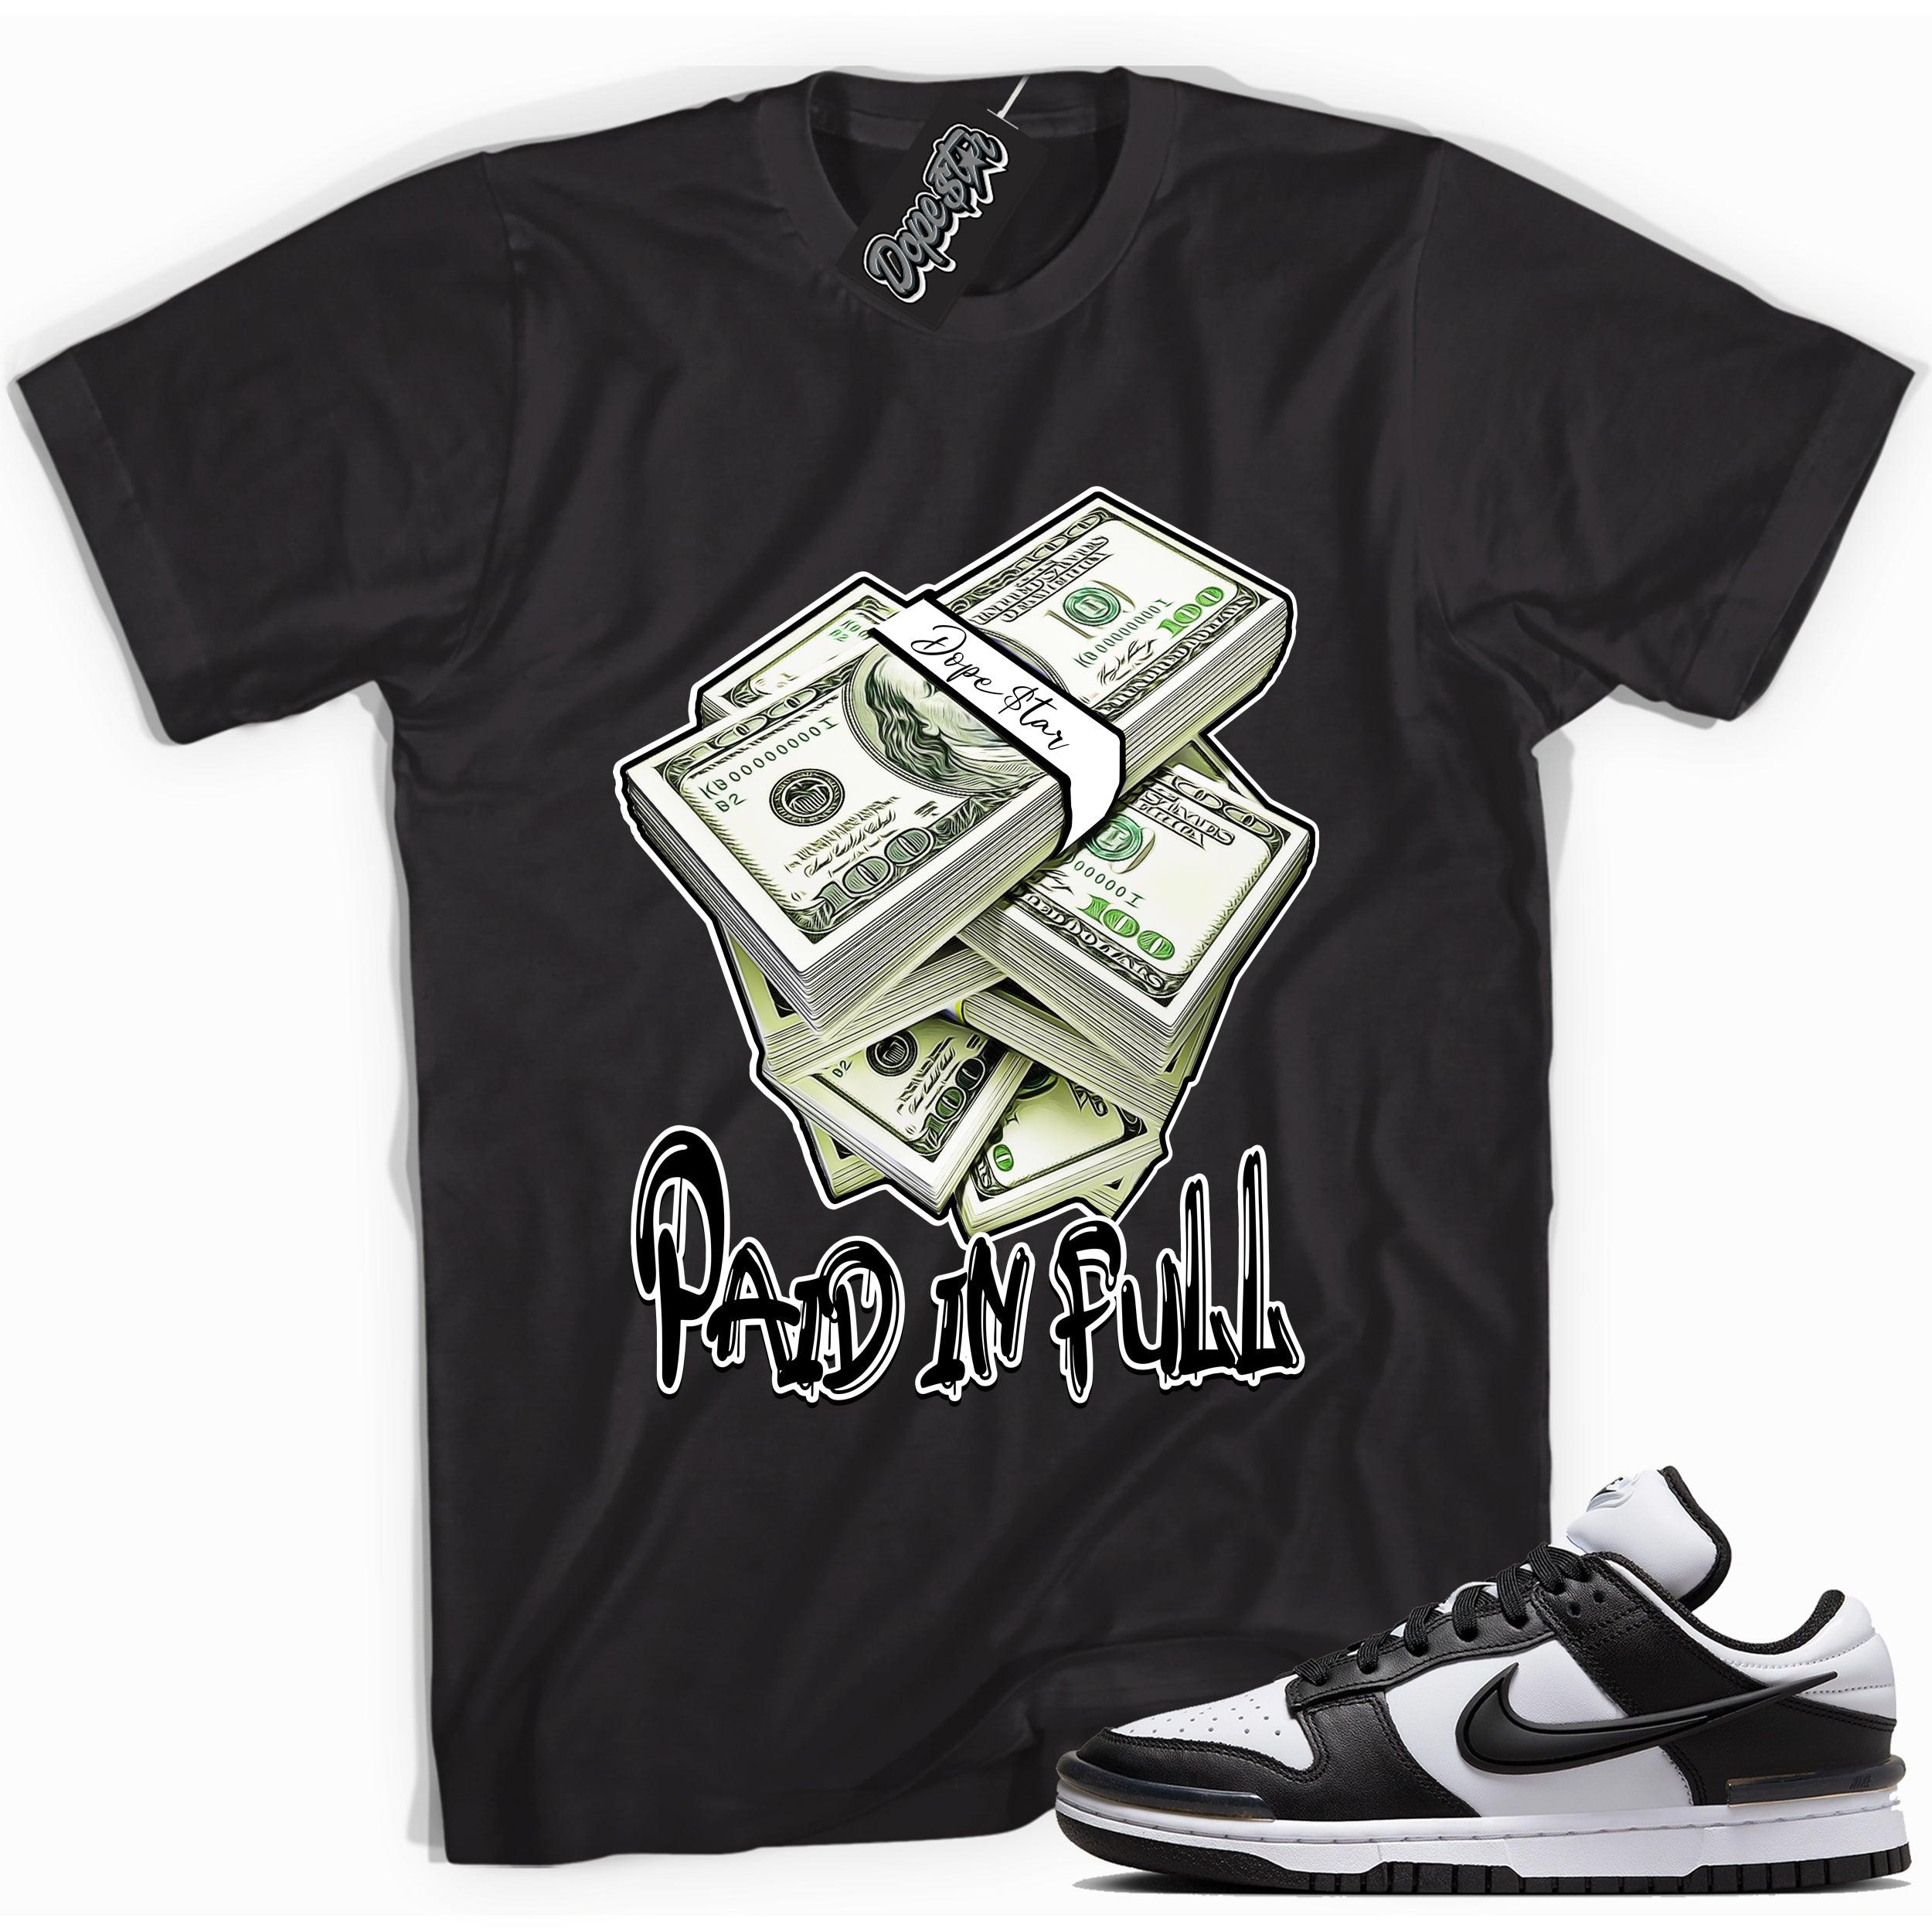 Cool black graphic tee with 'paid in full' print, that perfectly matches Nike Dunk Low Twist Panda sneakers.